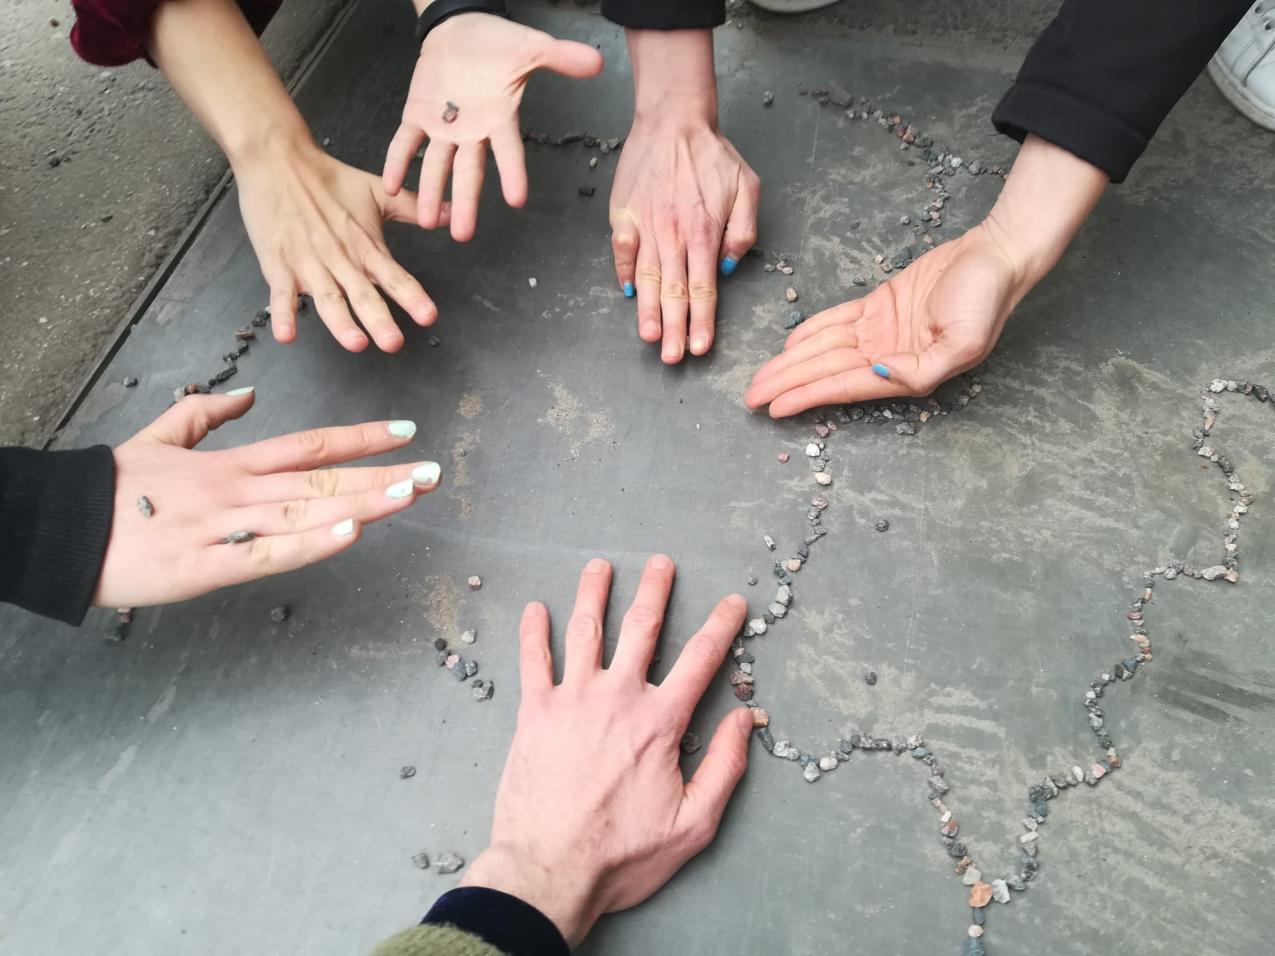 Six hands close to the floor and close to each other in a circle shape